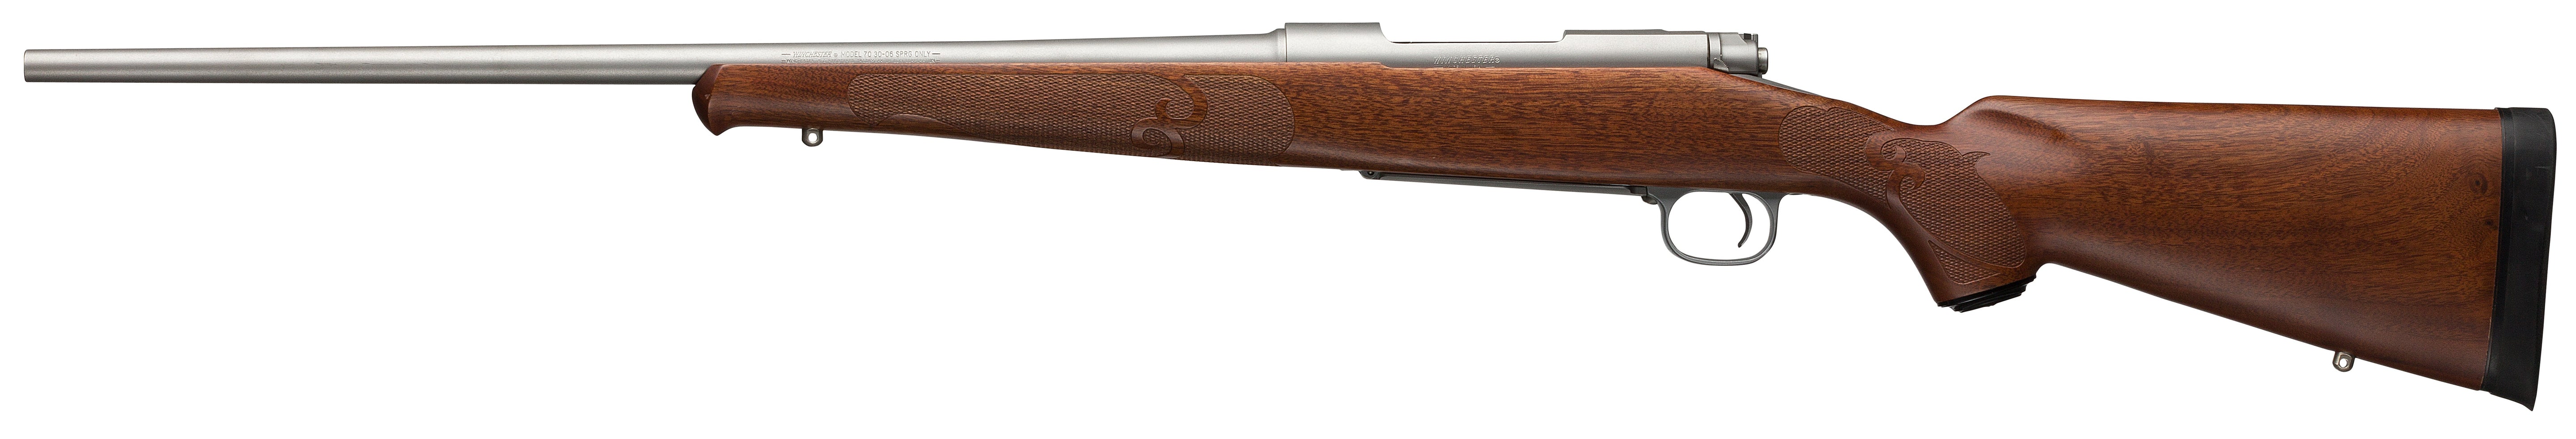 Winchester Model 70 - Stainless Steel